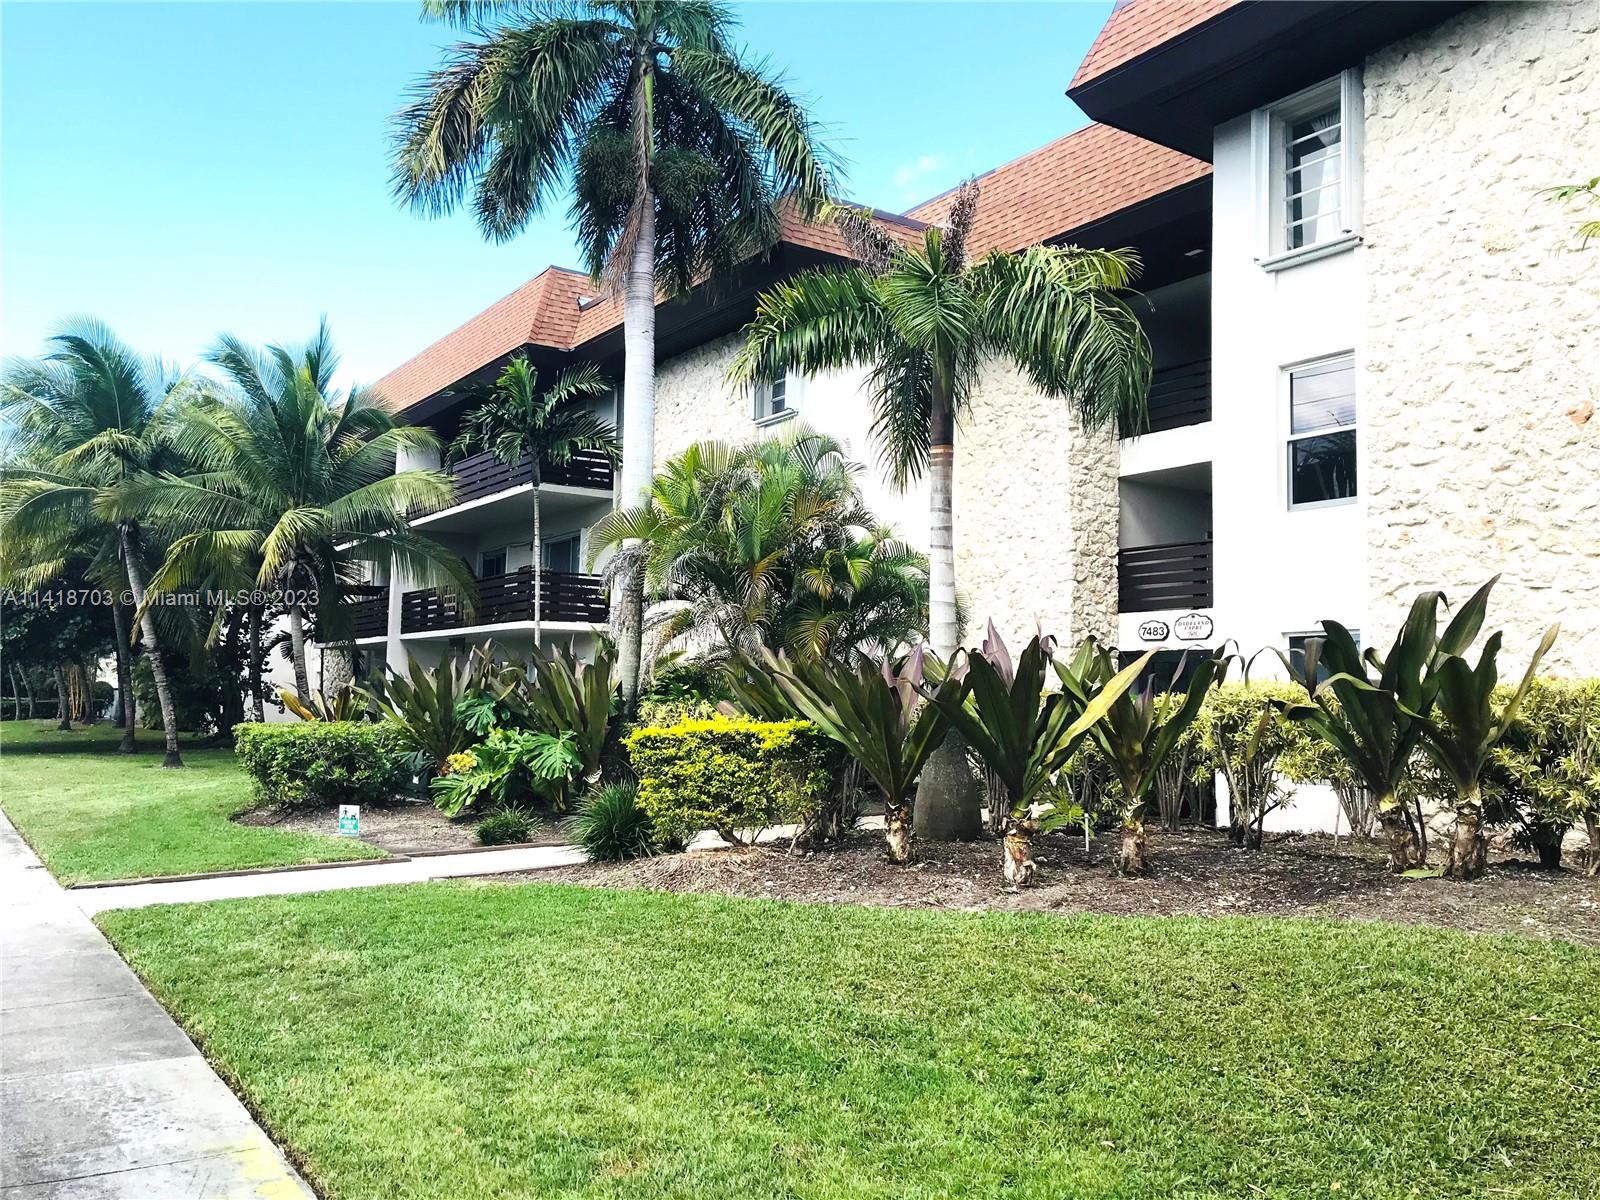 INVESTORS ONLY...TENANT OCCUPIED UNTIL MARCH 1ST 2024 ...BEAUTIFUL AND UPDATED 1/1 GROUND FLOOR UNIT IN DADELAND AREA...GREAT LOCATION...1 ASSIGNED PARKING SPACE...SWIMMING POOL AND EXERCISE ROOM...WASHER/DRYER... ON-SITE MANAGEMENT AND MORE!!!